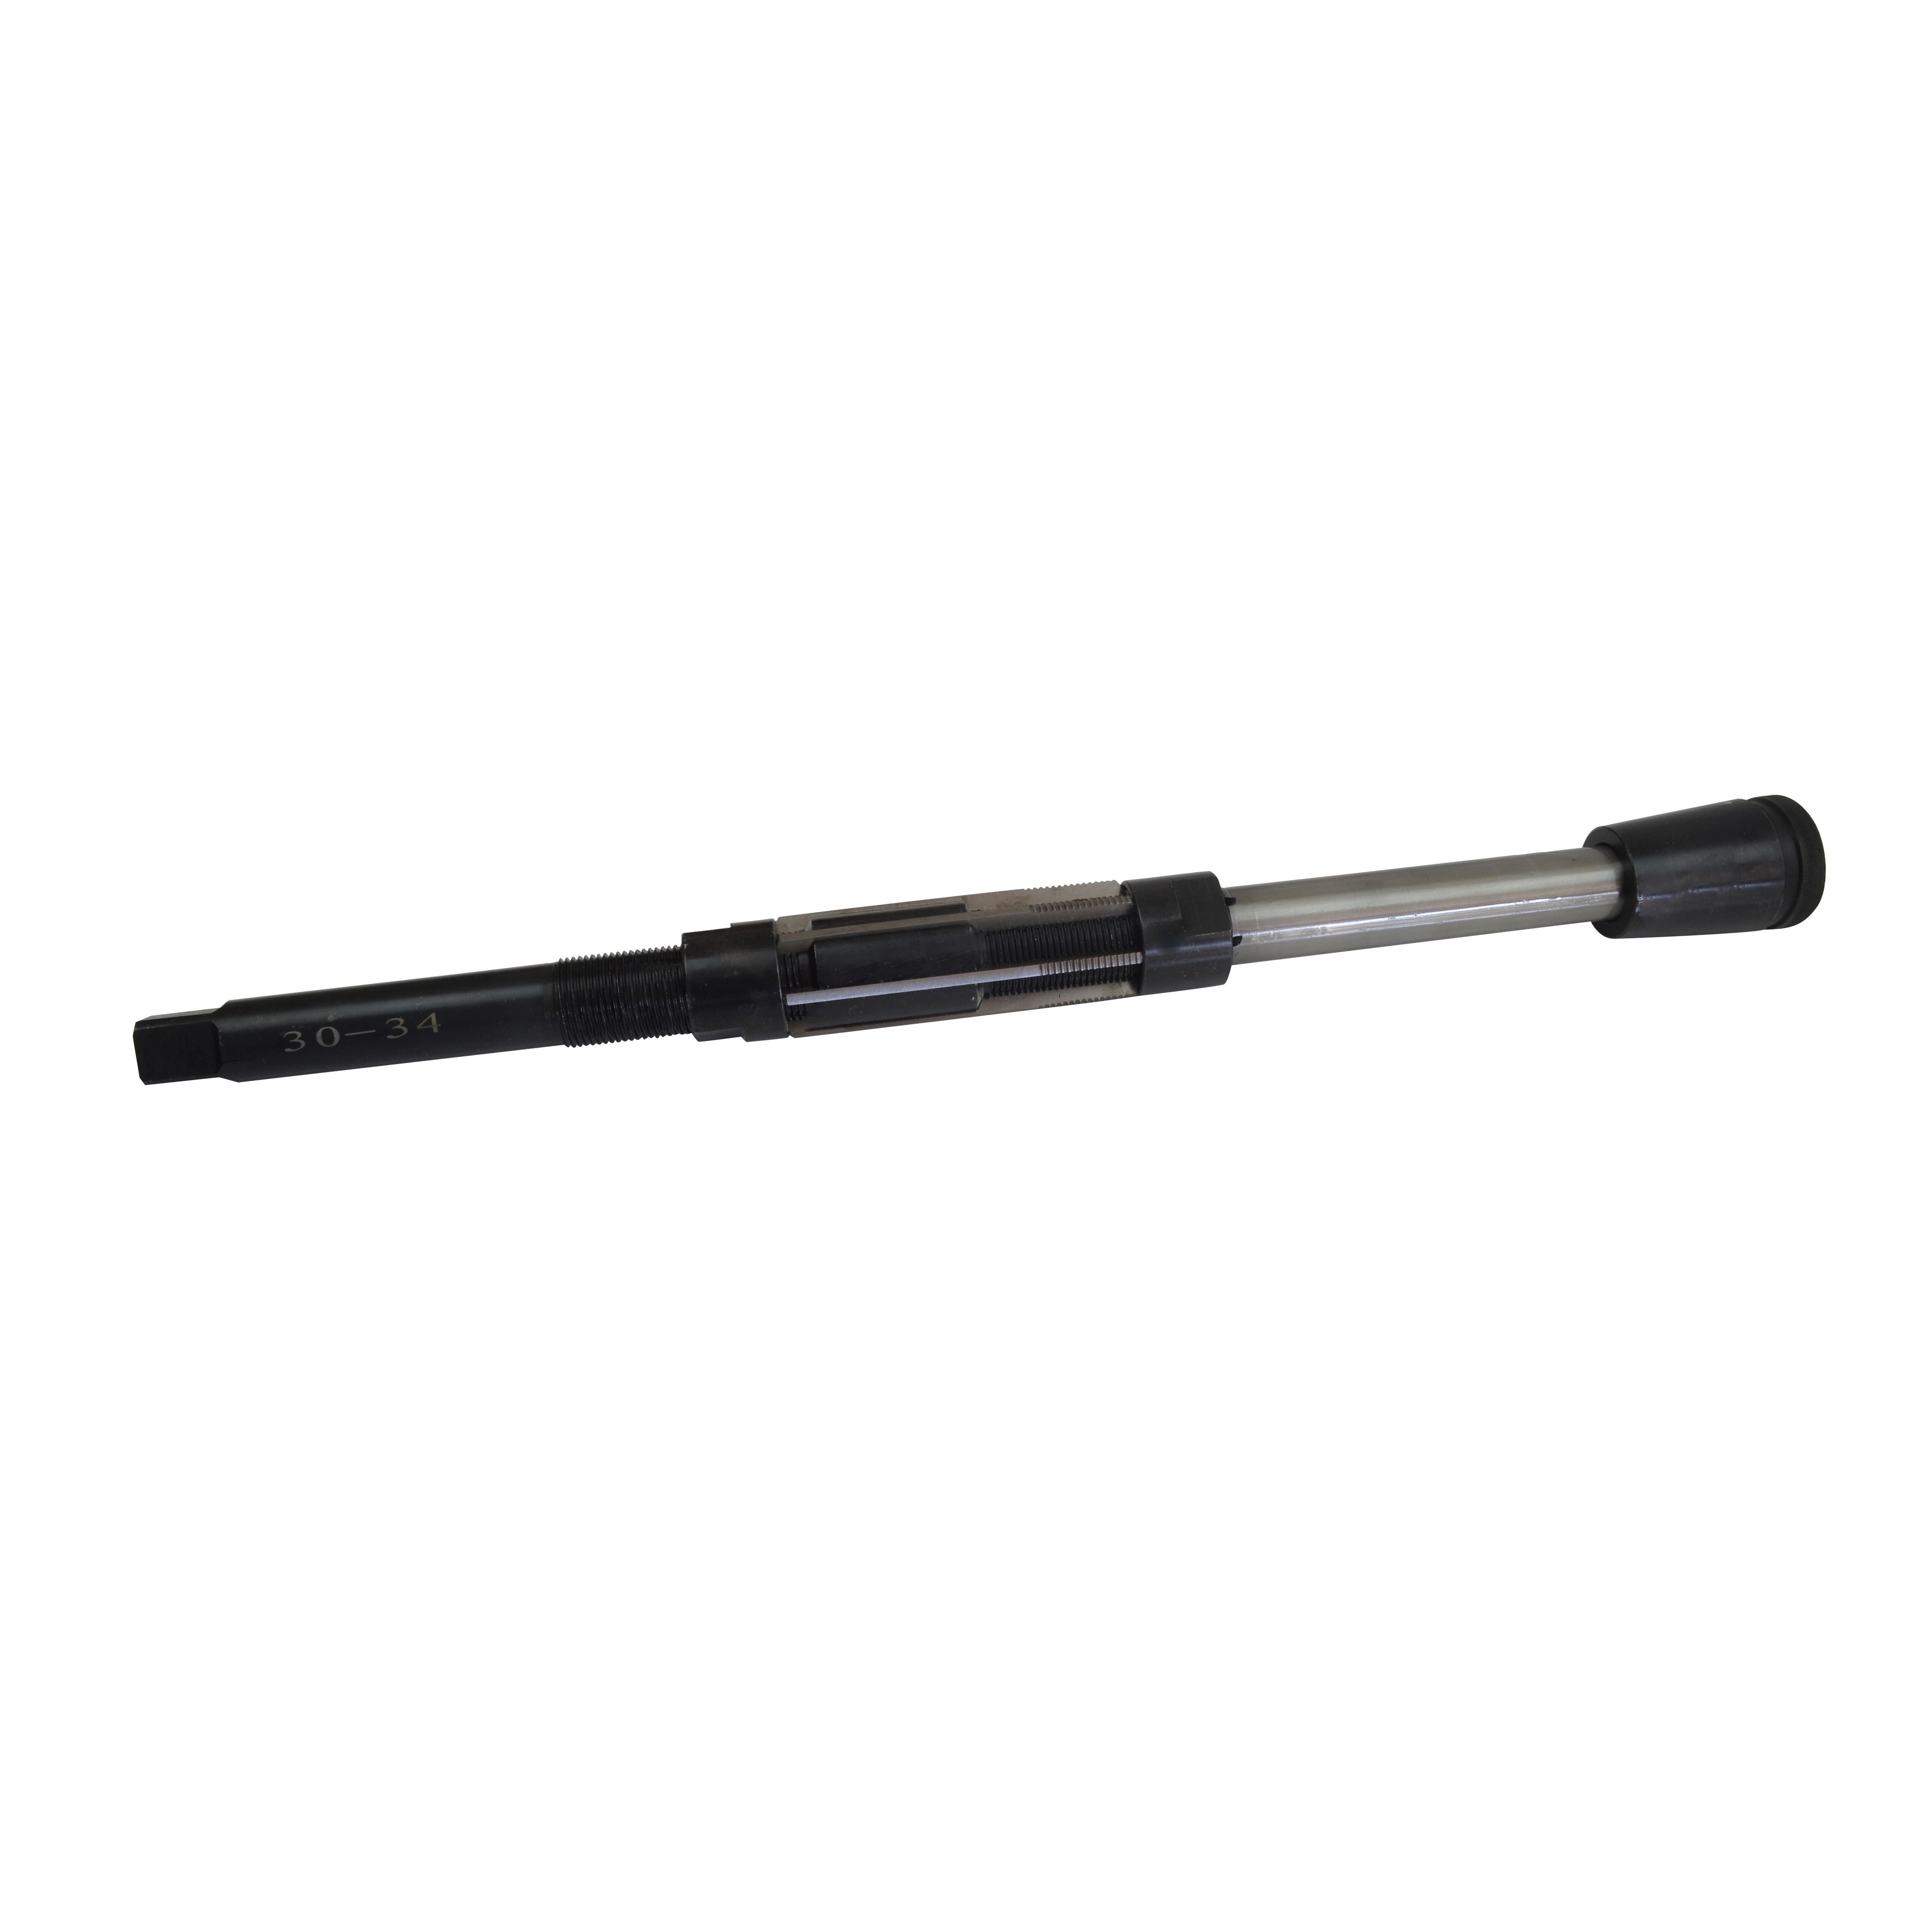 30 - 34mm Adjustable Hand Reamer with Guide